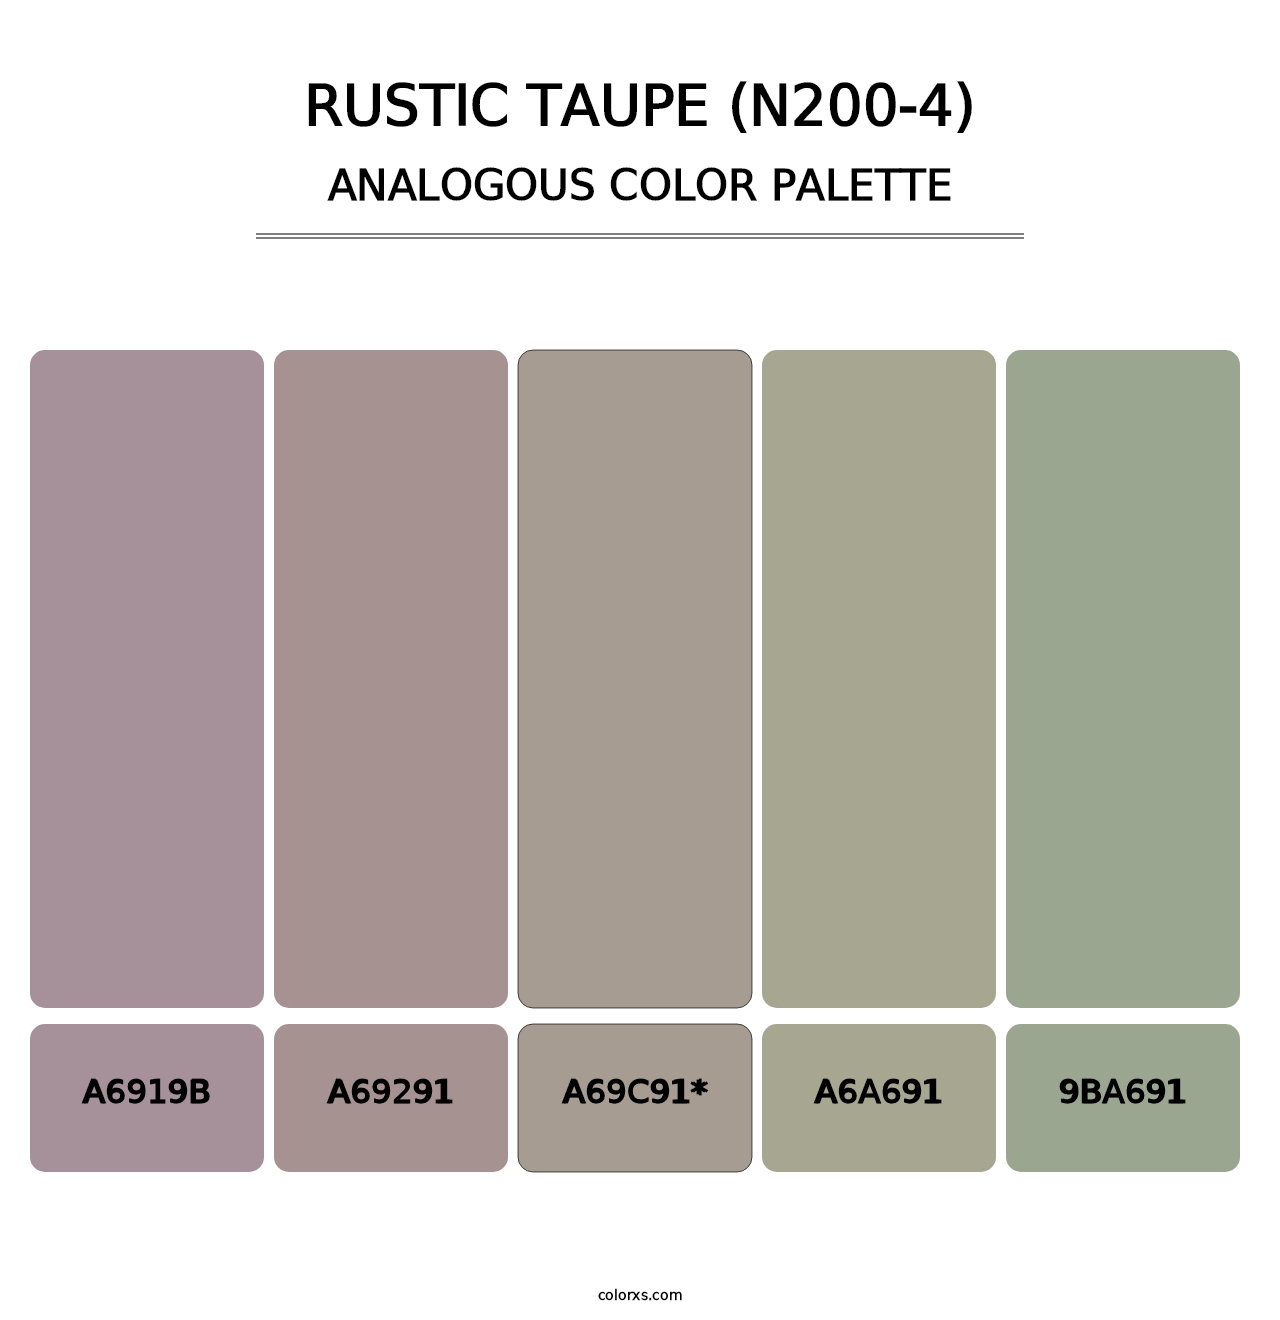 Rustic Taupe (N200-4) - Analogous Color Palette